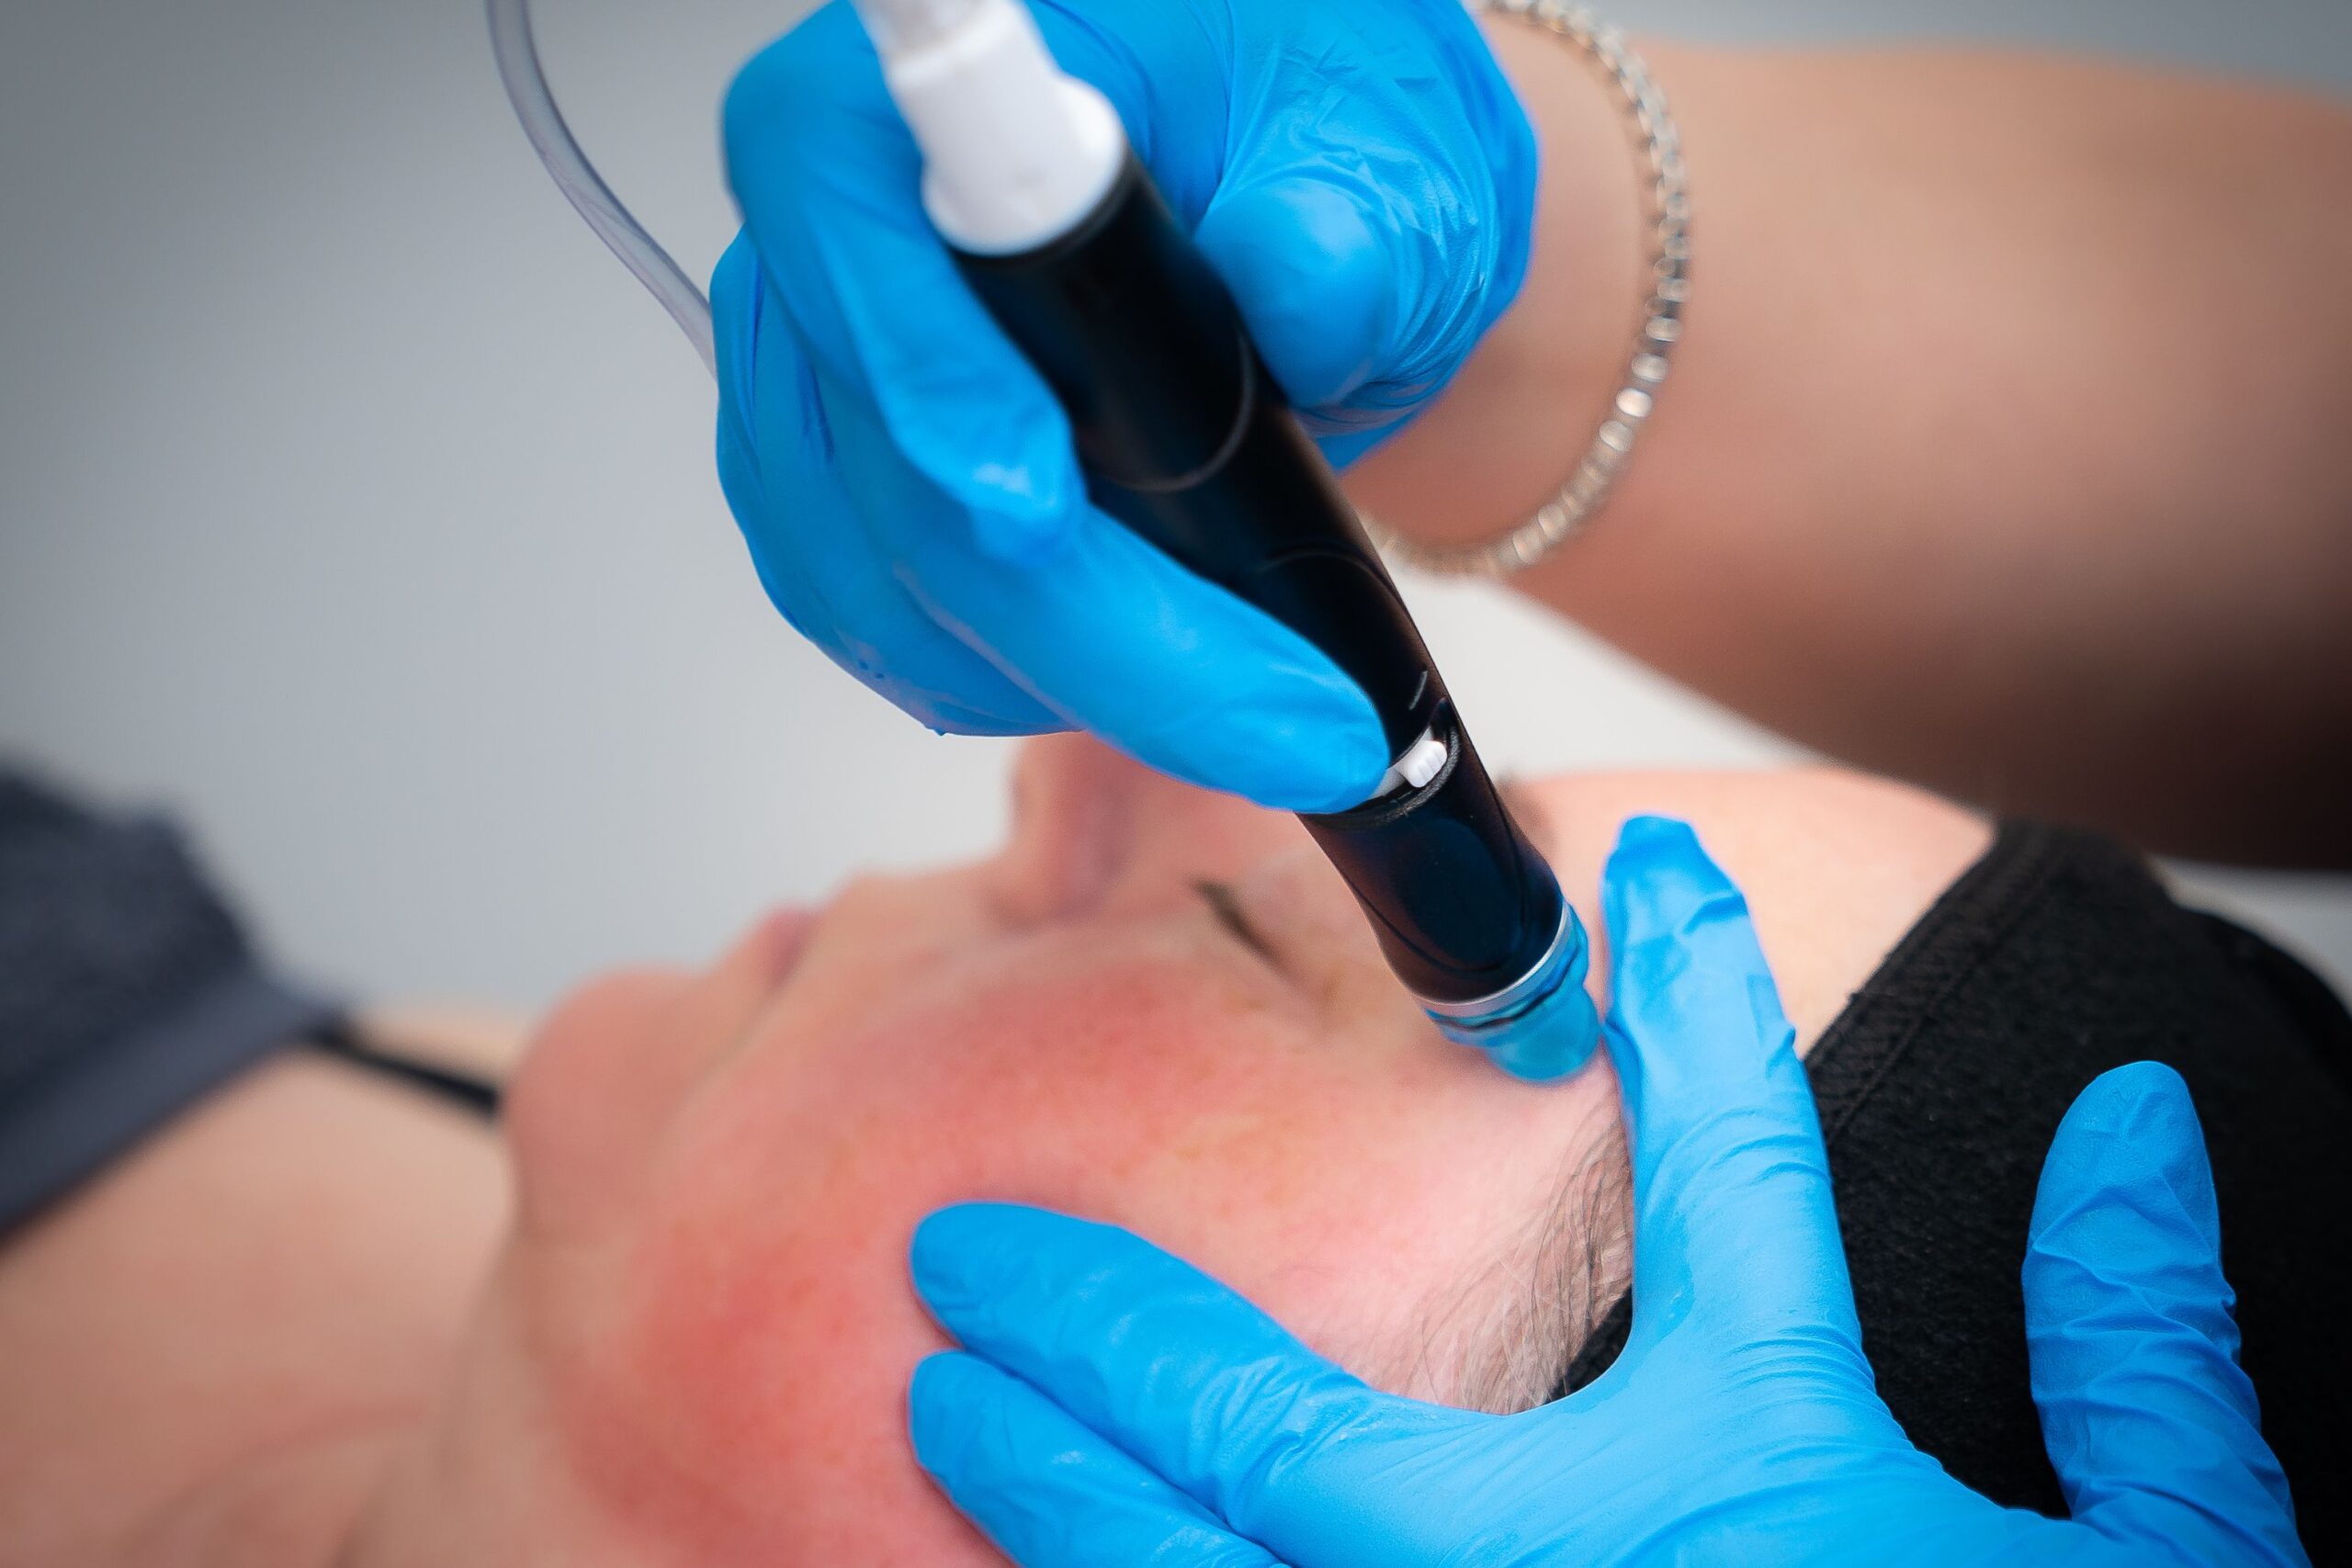 Hydrafacial for uneven skin texture at Freyja Medical in Wrexham, Nantwich and Cheshire